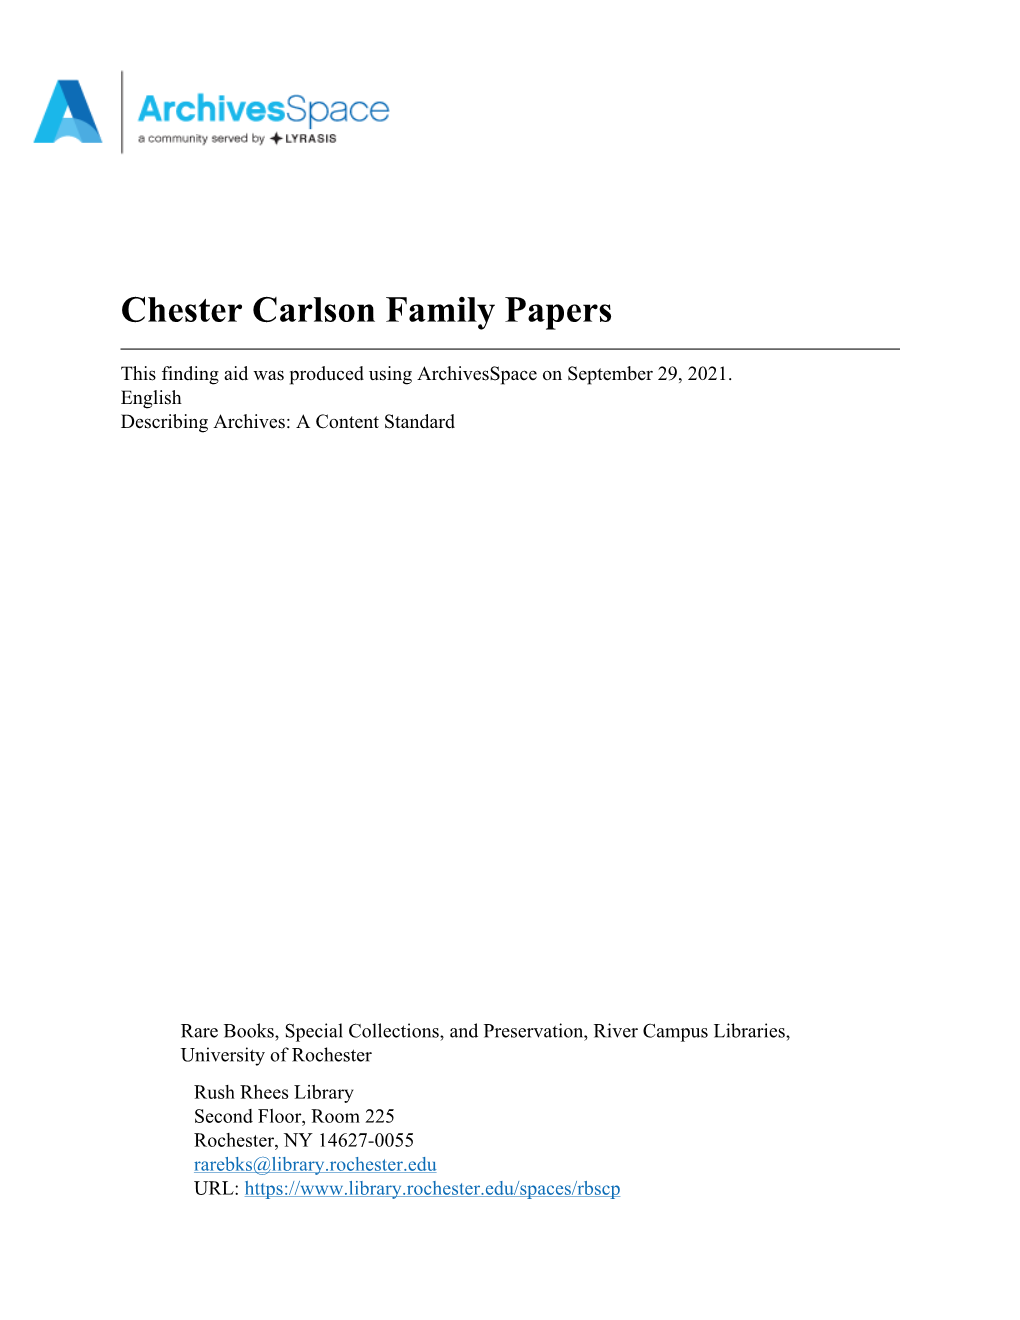 Chester Carlson Family Papers